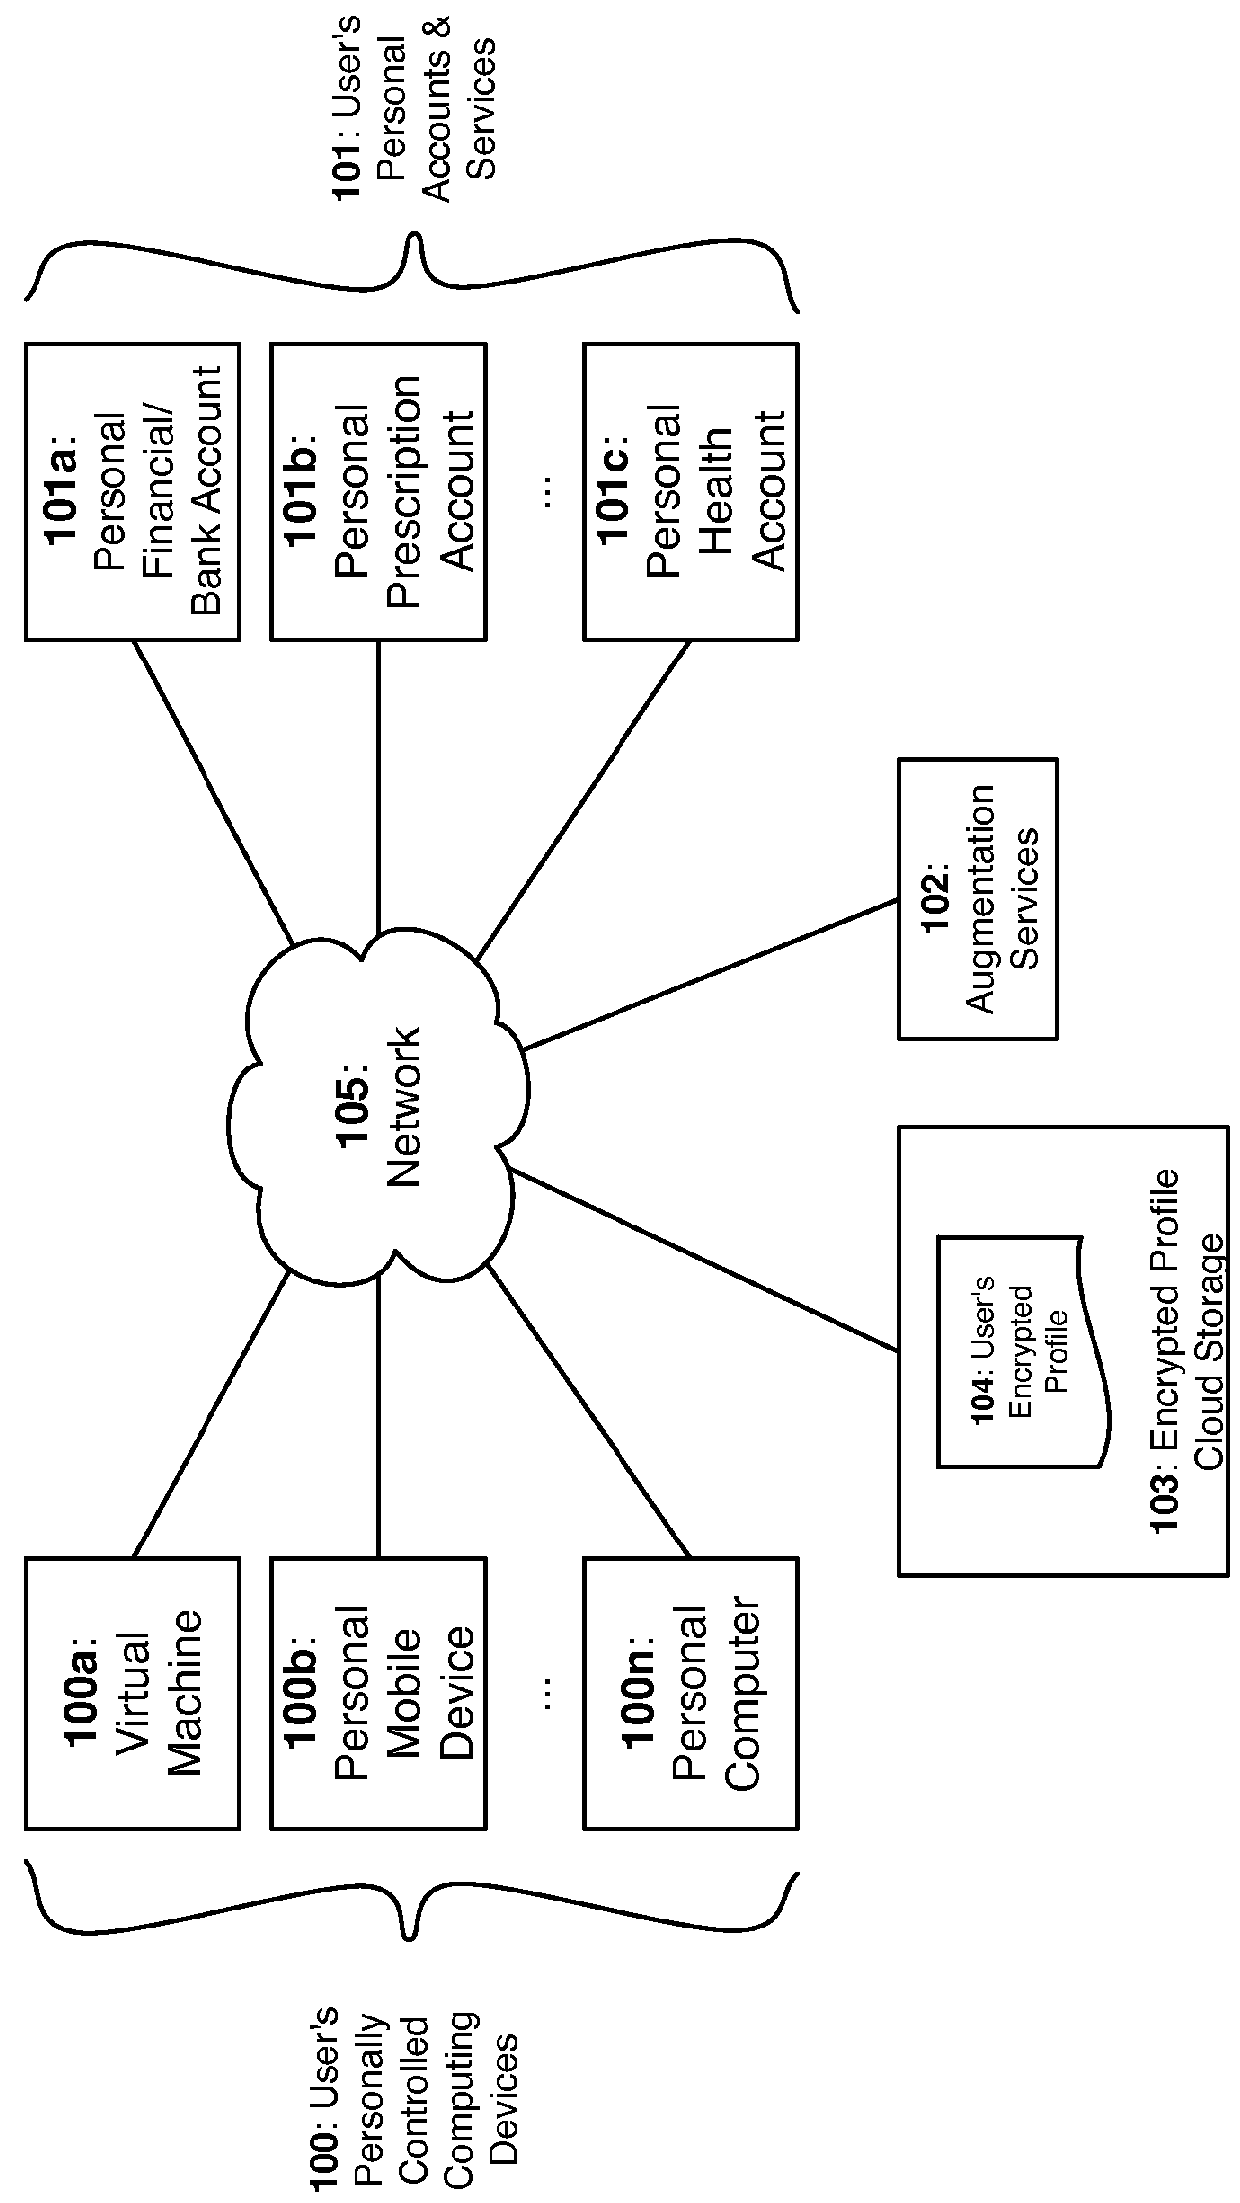 Decentralized Systems and Methods to Securely Aggregate Unstructured Personal Data on User Controlled Devices